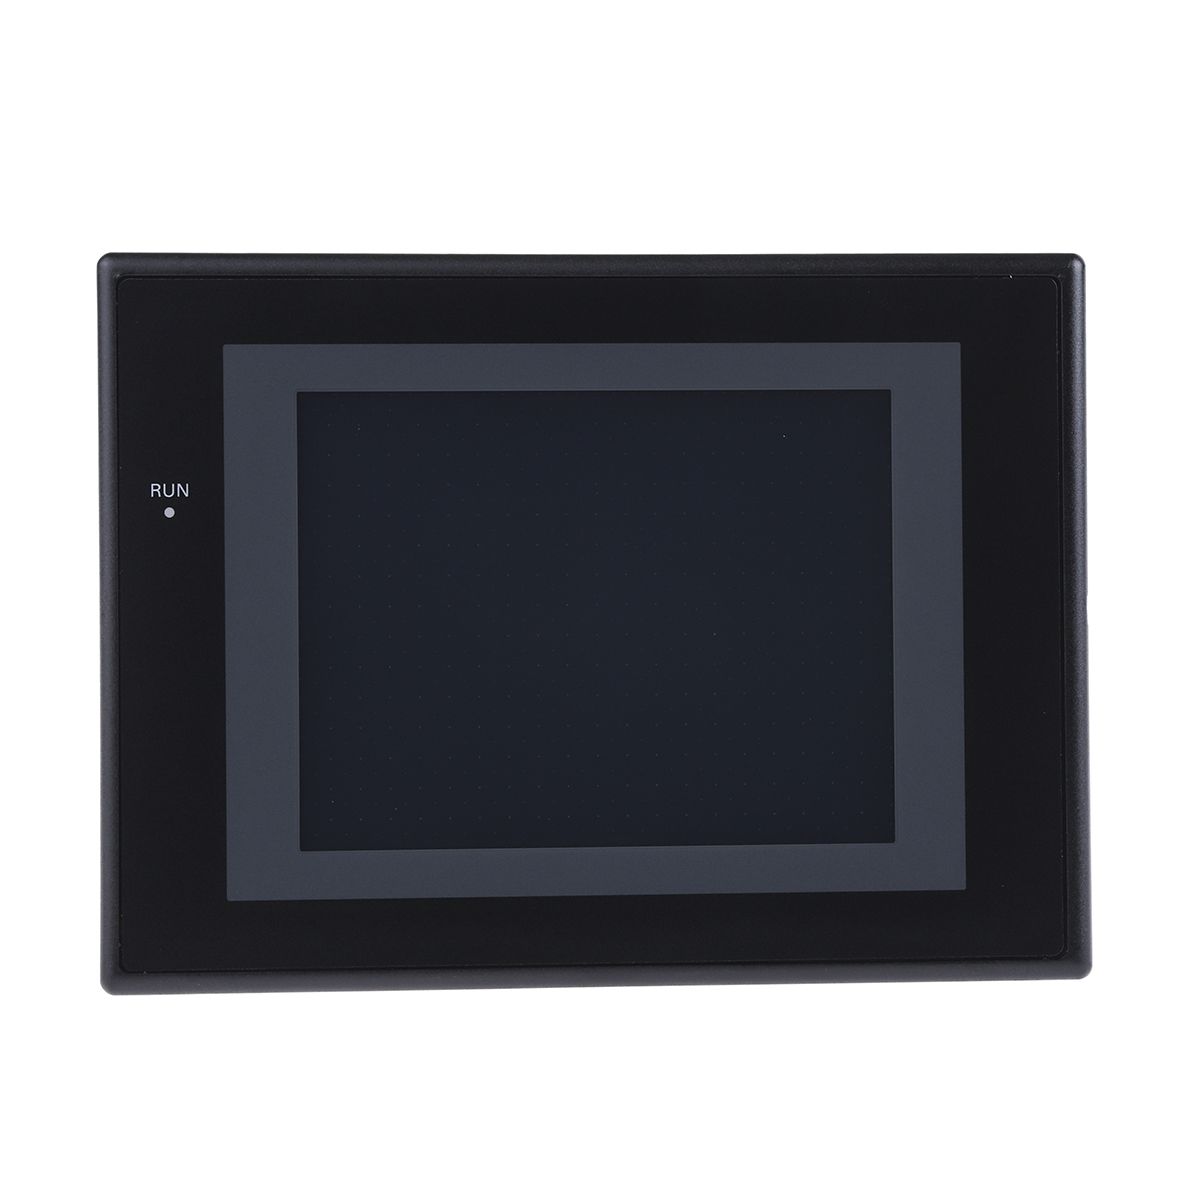 Omron NS5 Series Touch Screen HMI - 5.7 in, LCD Display, 320 x 240pixels